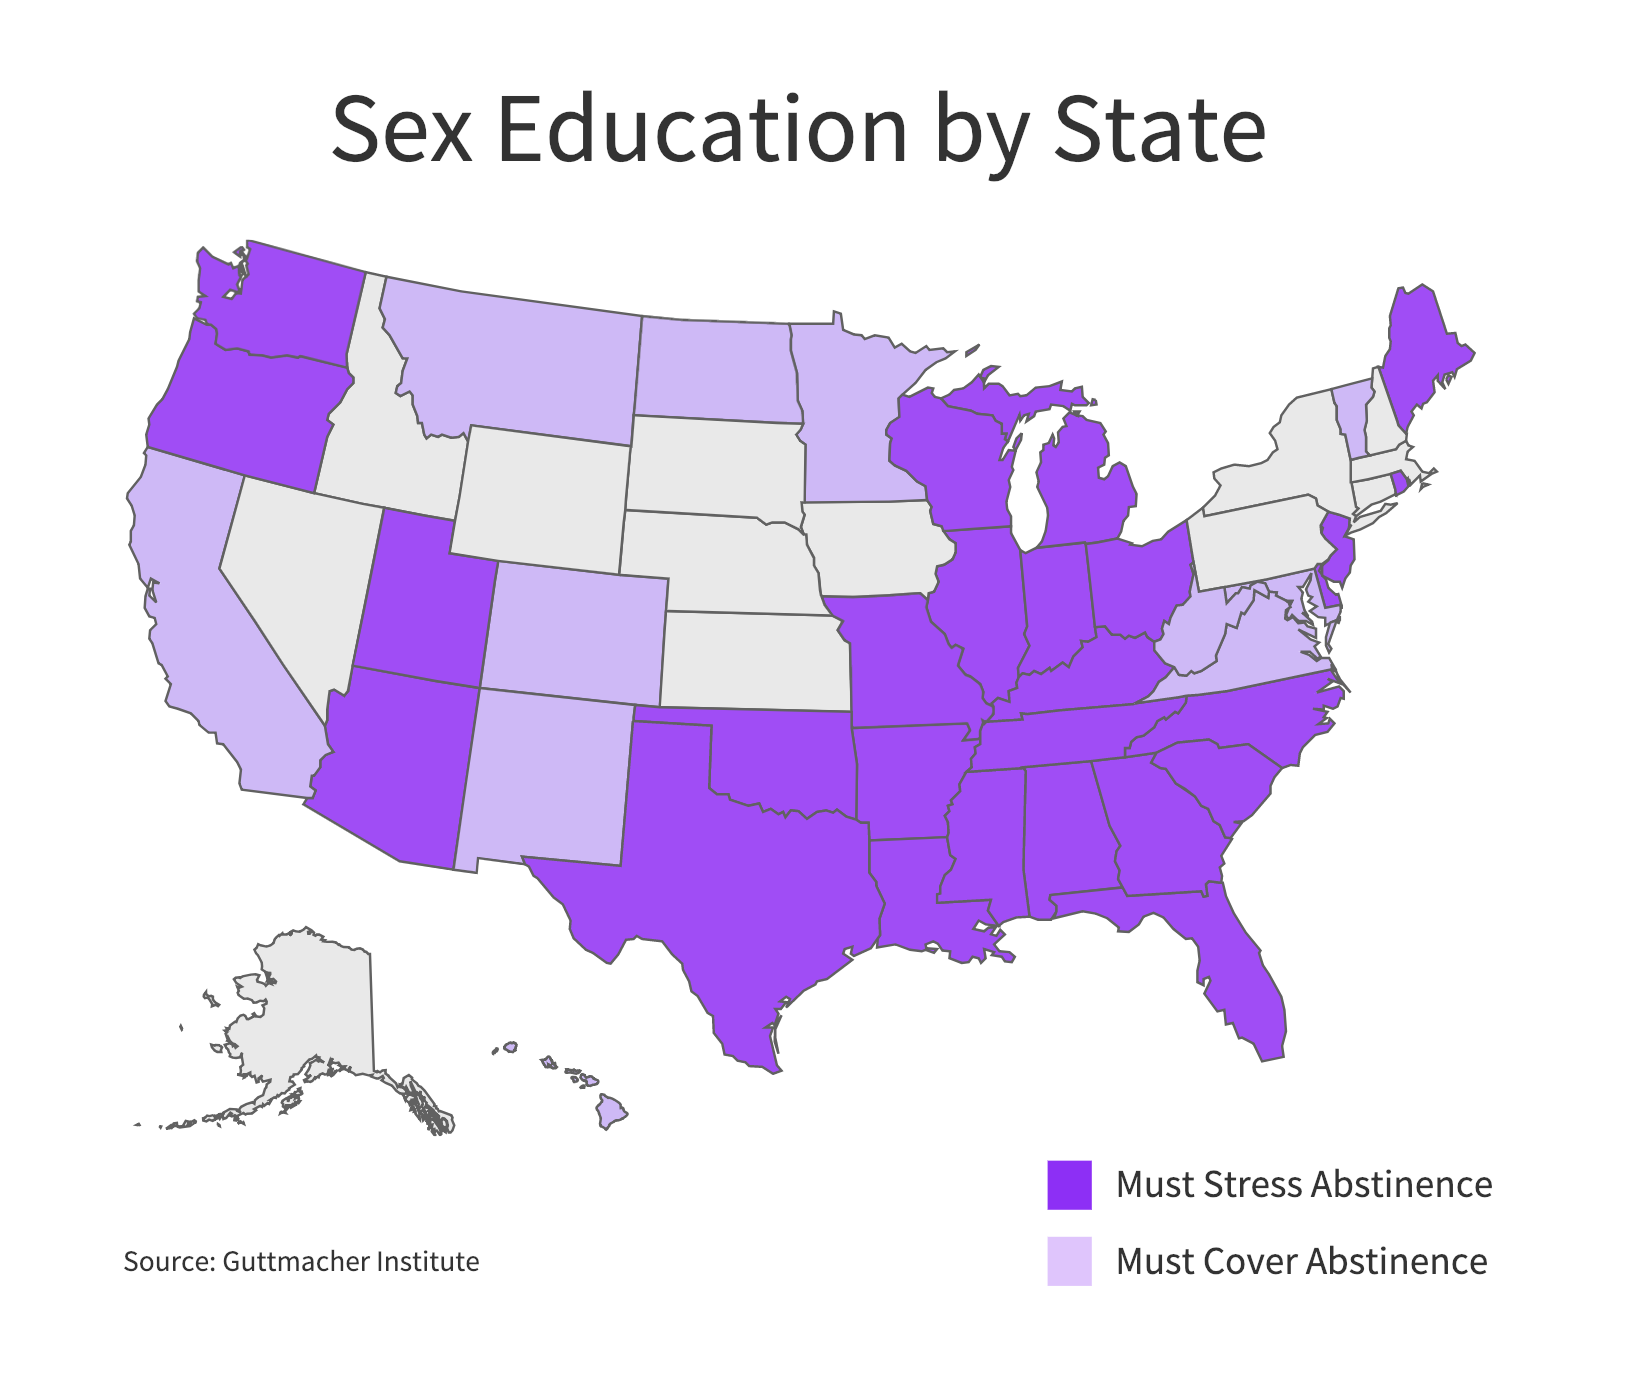 Twenty-six states require that when sexual education is provided it stress abstinence. Eleven states require that when sexual education is provided it cover abstinence. (Charts by Ester Wells/MNS)